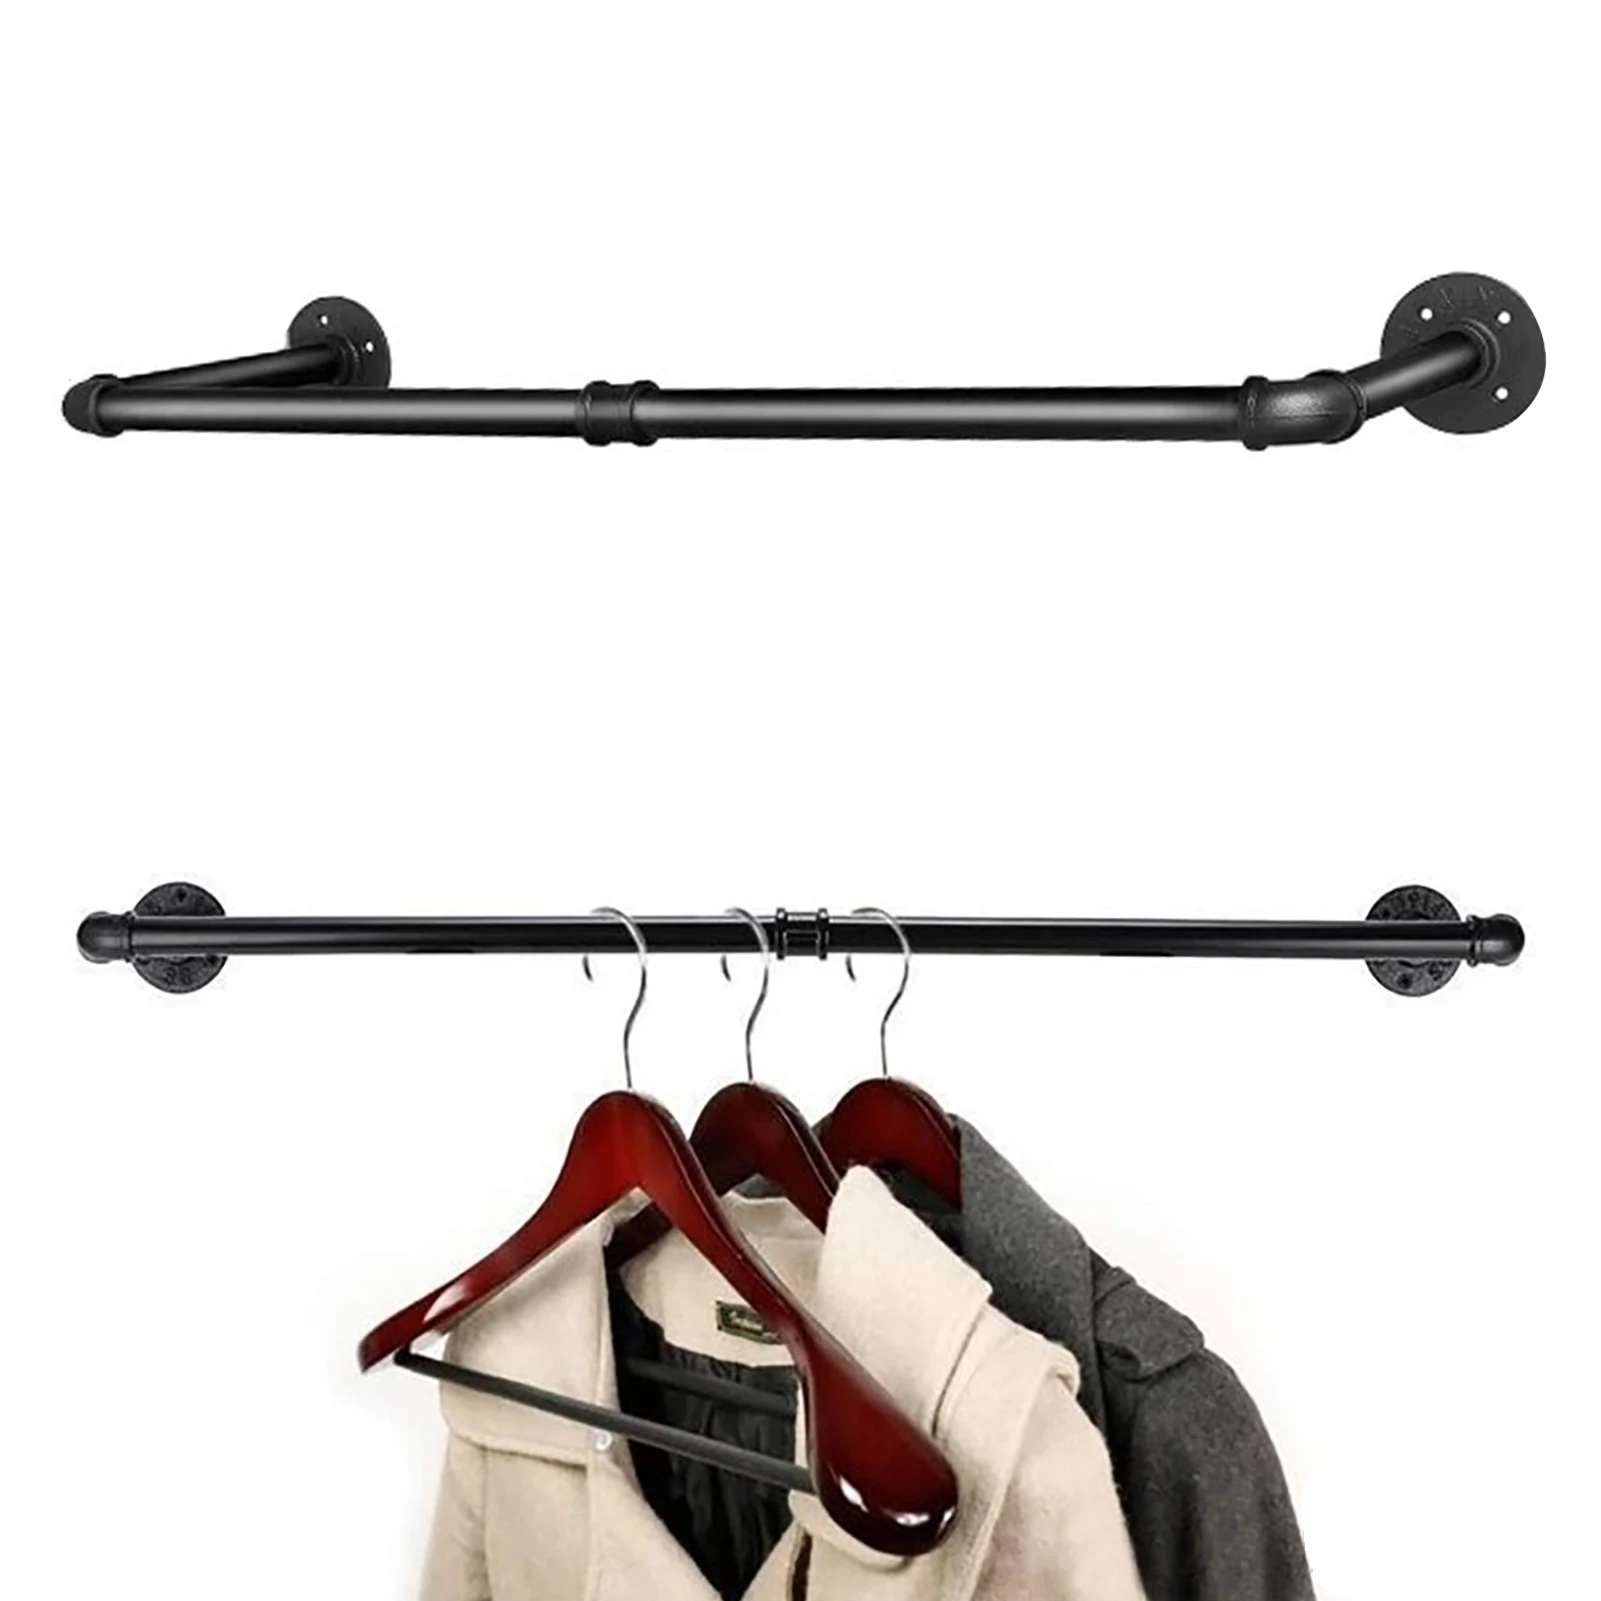 

Bathroom Towel Holder Vintage Home Use Garment Accessories Industrial Pipe Stable Hanging Rail Heavy Duty Wall Mounted Wardrobe